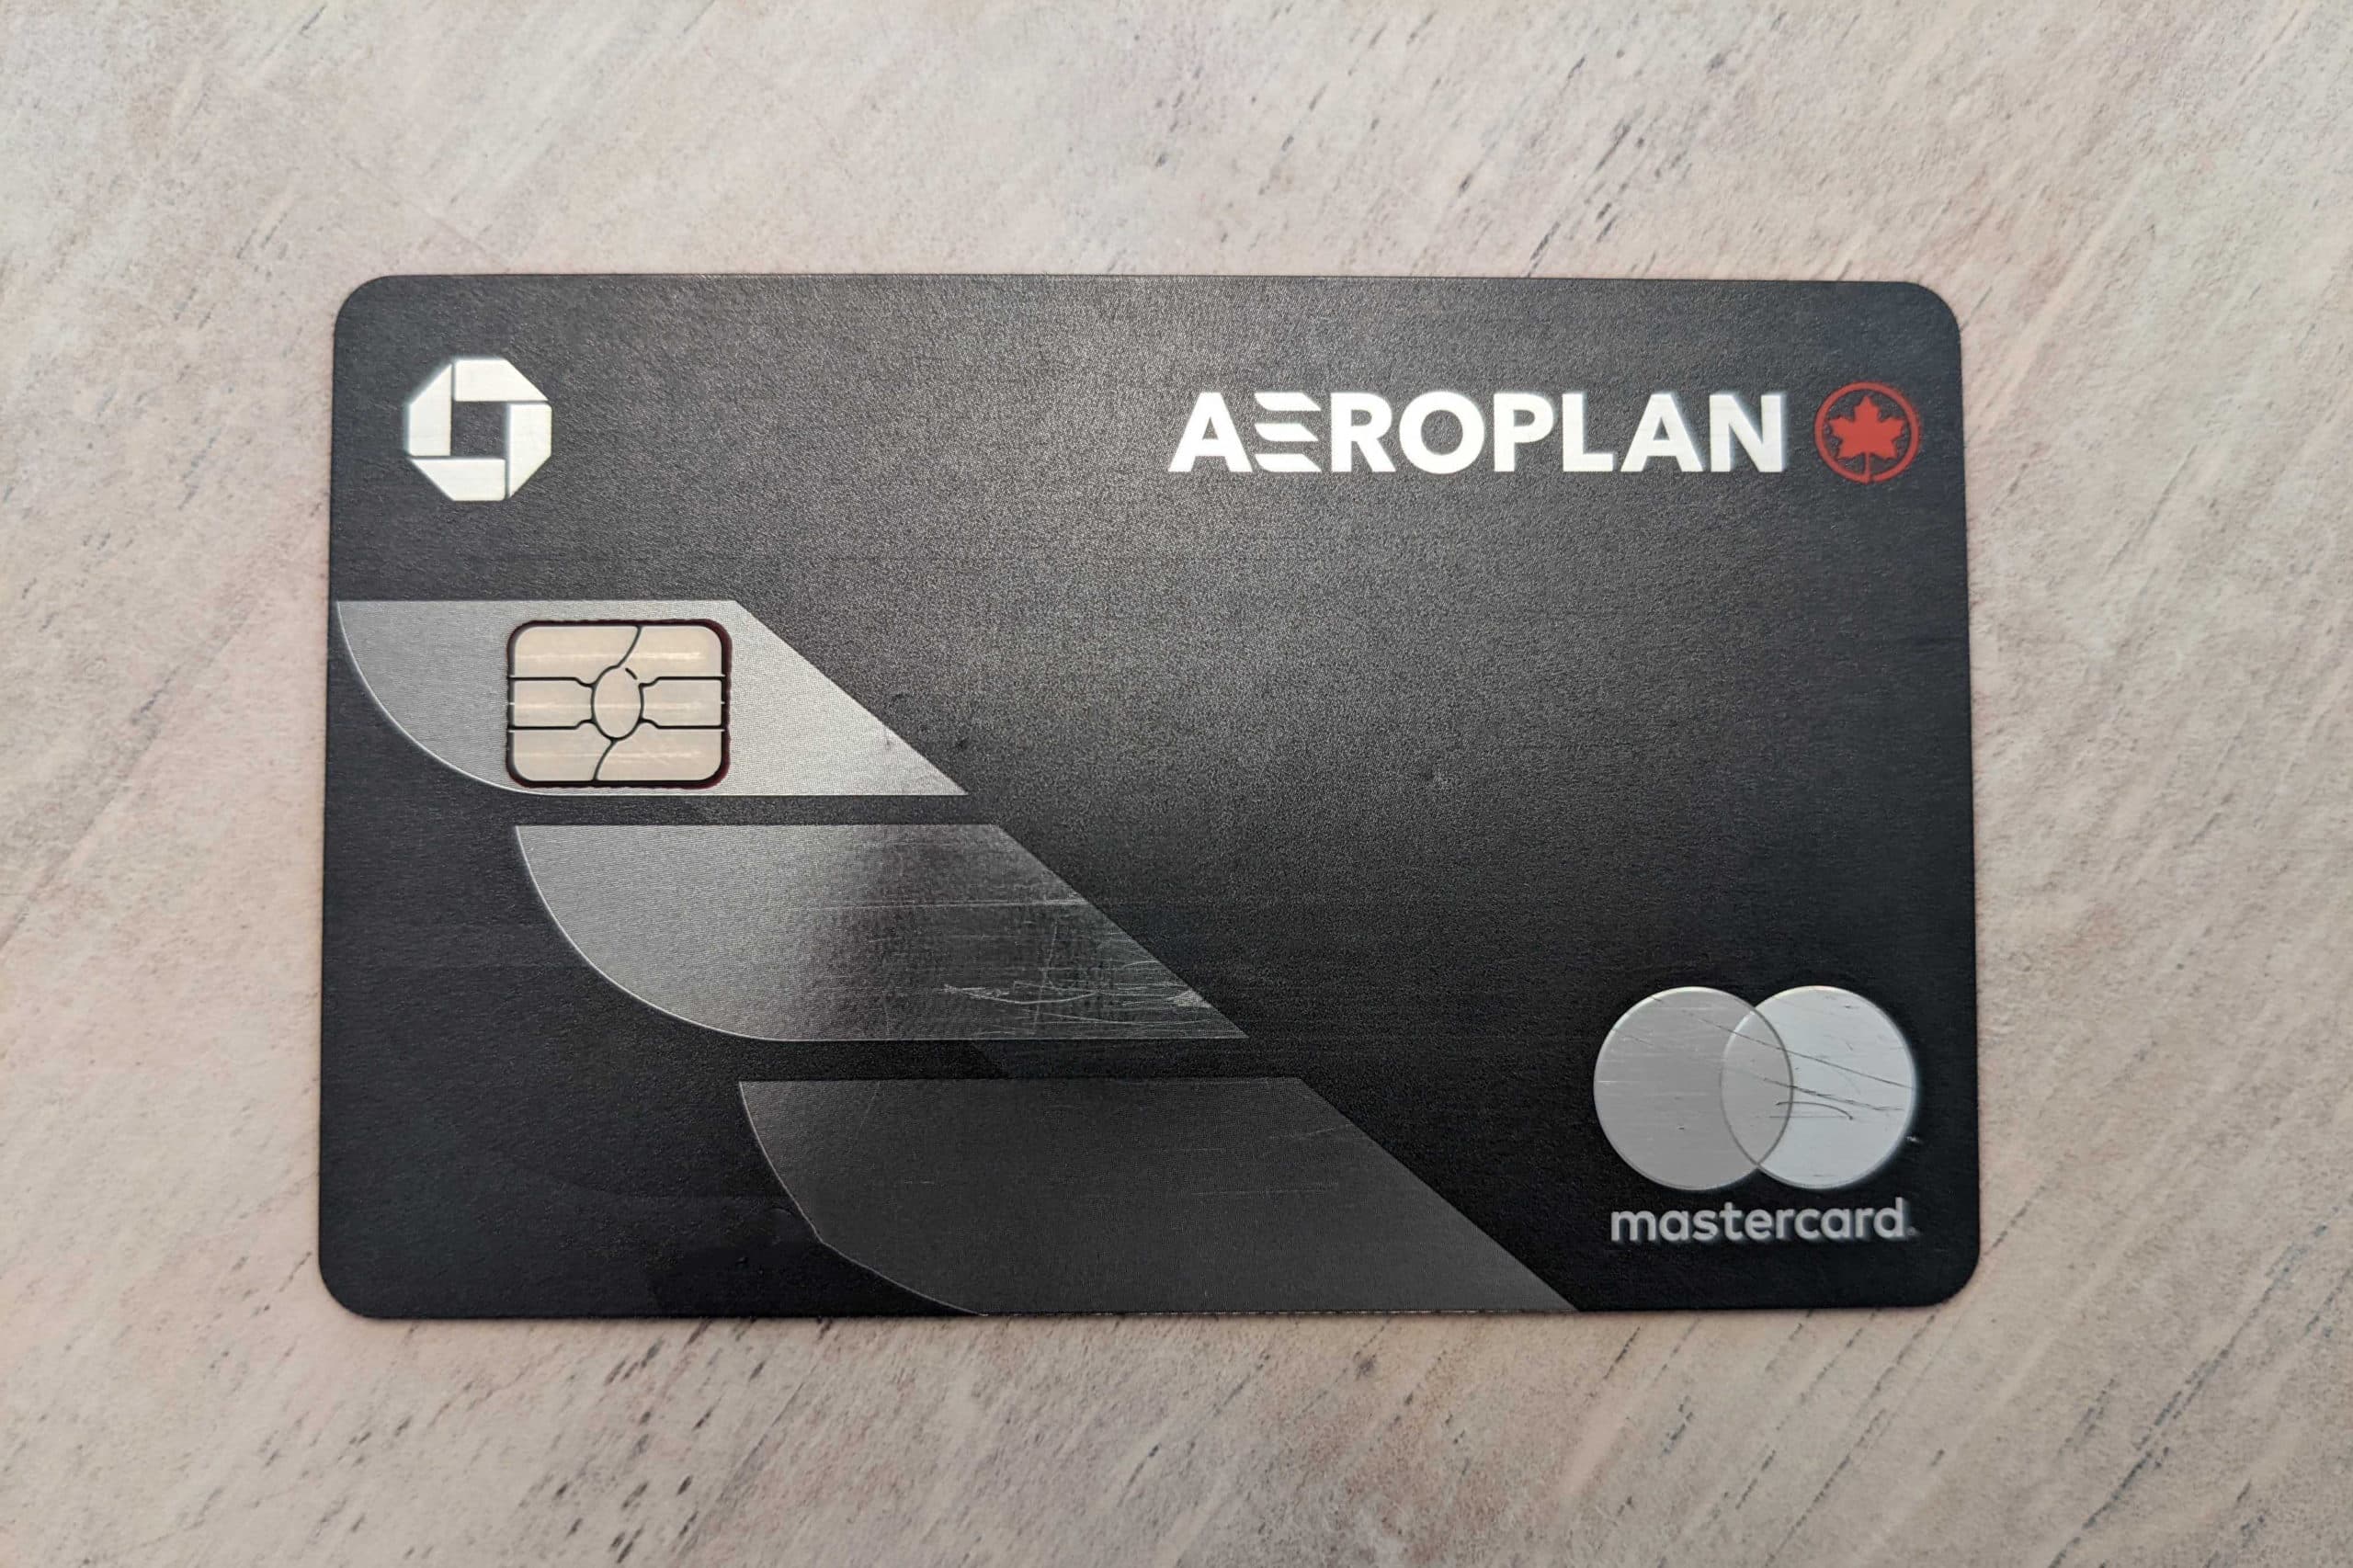 Chase Aeroplan Card: 10x Details on Worldwide Purchases